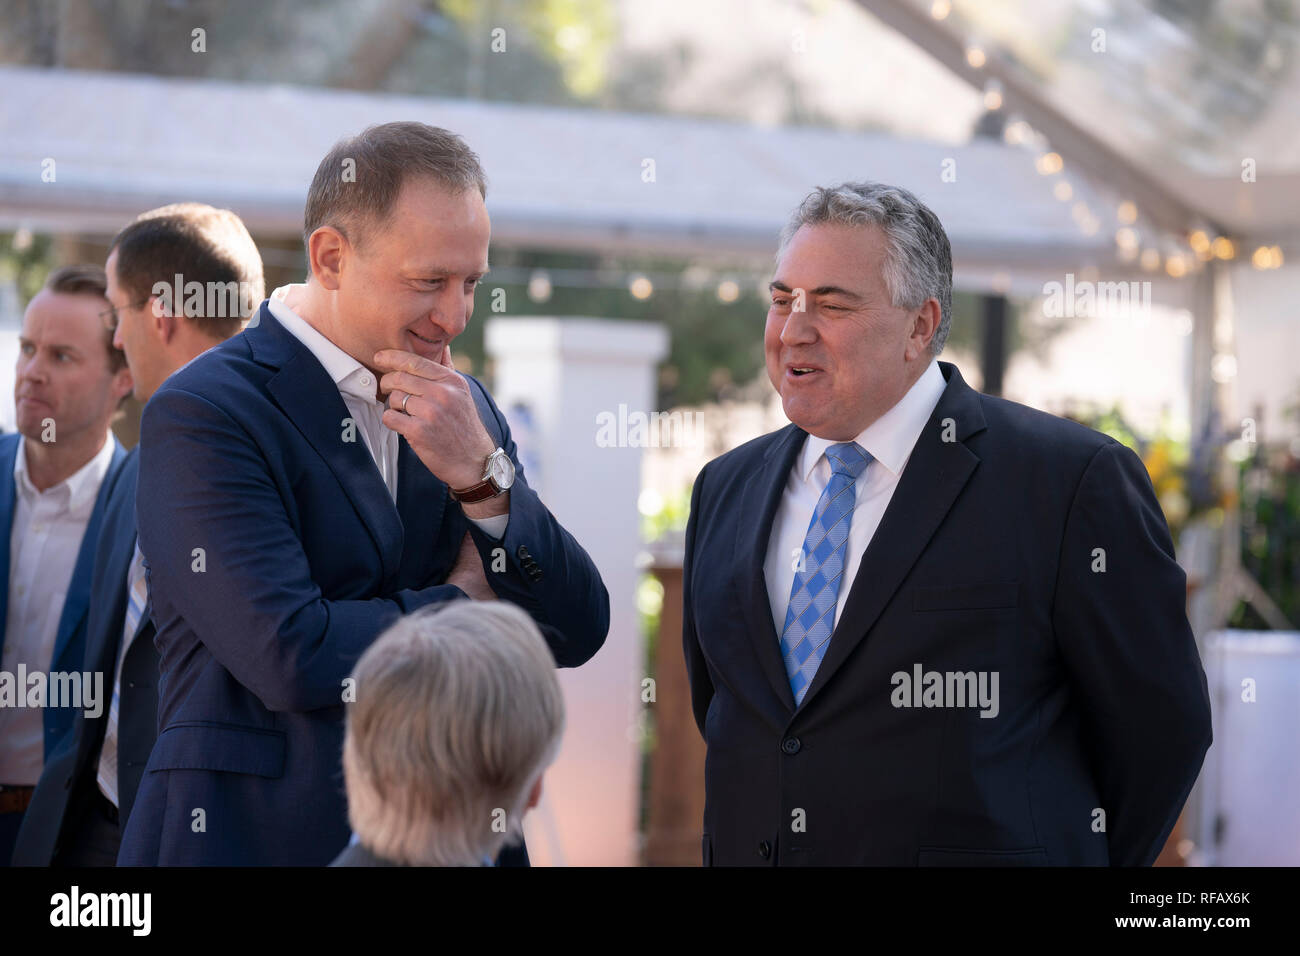 Joe Hockey, center, Australian ambassador to the United States, and Austin, Texas, businessman James Messer, left, visit with Texas Gov. Greg Abbott during the Great Mates Australia-Texas Barbecue at the Governor's Mansion in Austin. Abbott and Hockey worked to strengthen ties between the allies discussing agriculture and high tech before eating Australian Vegemite burnt ends and HeartBrand Akaushi beef. Stock Photo